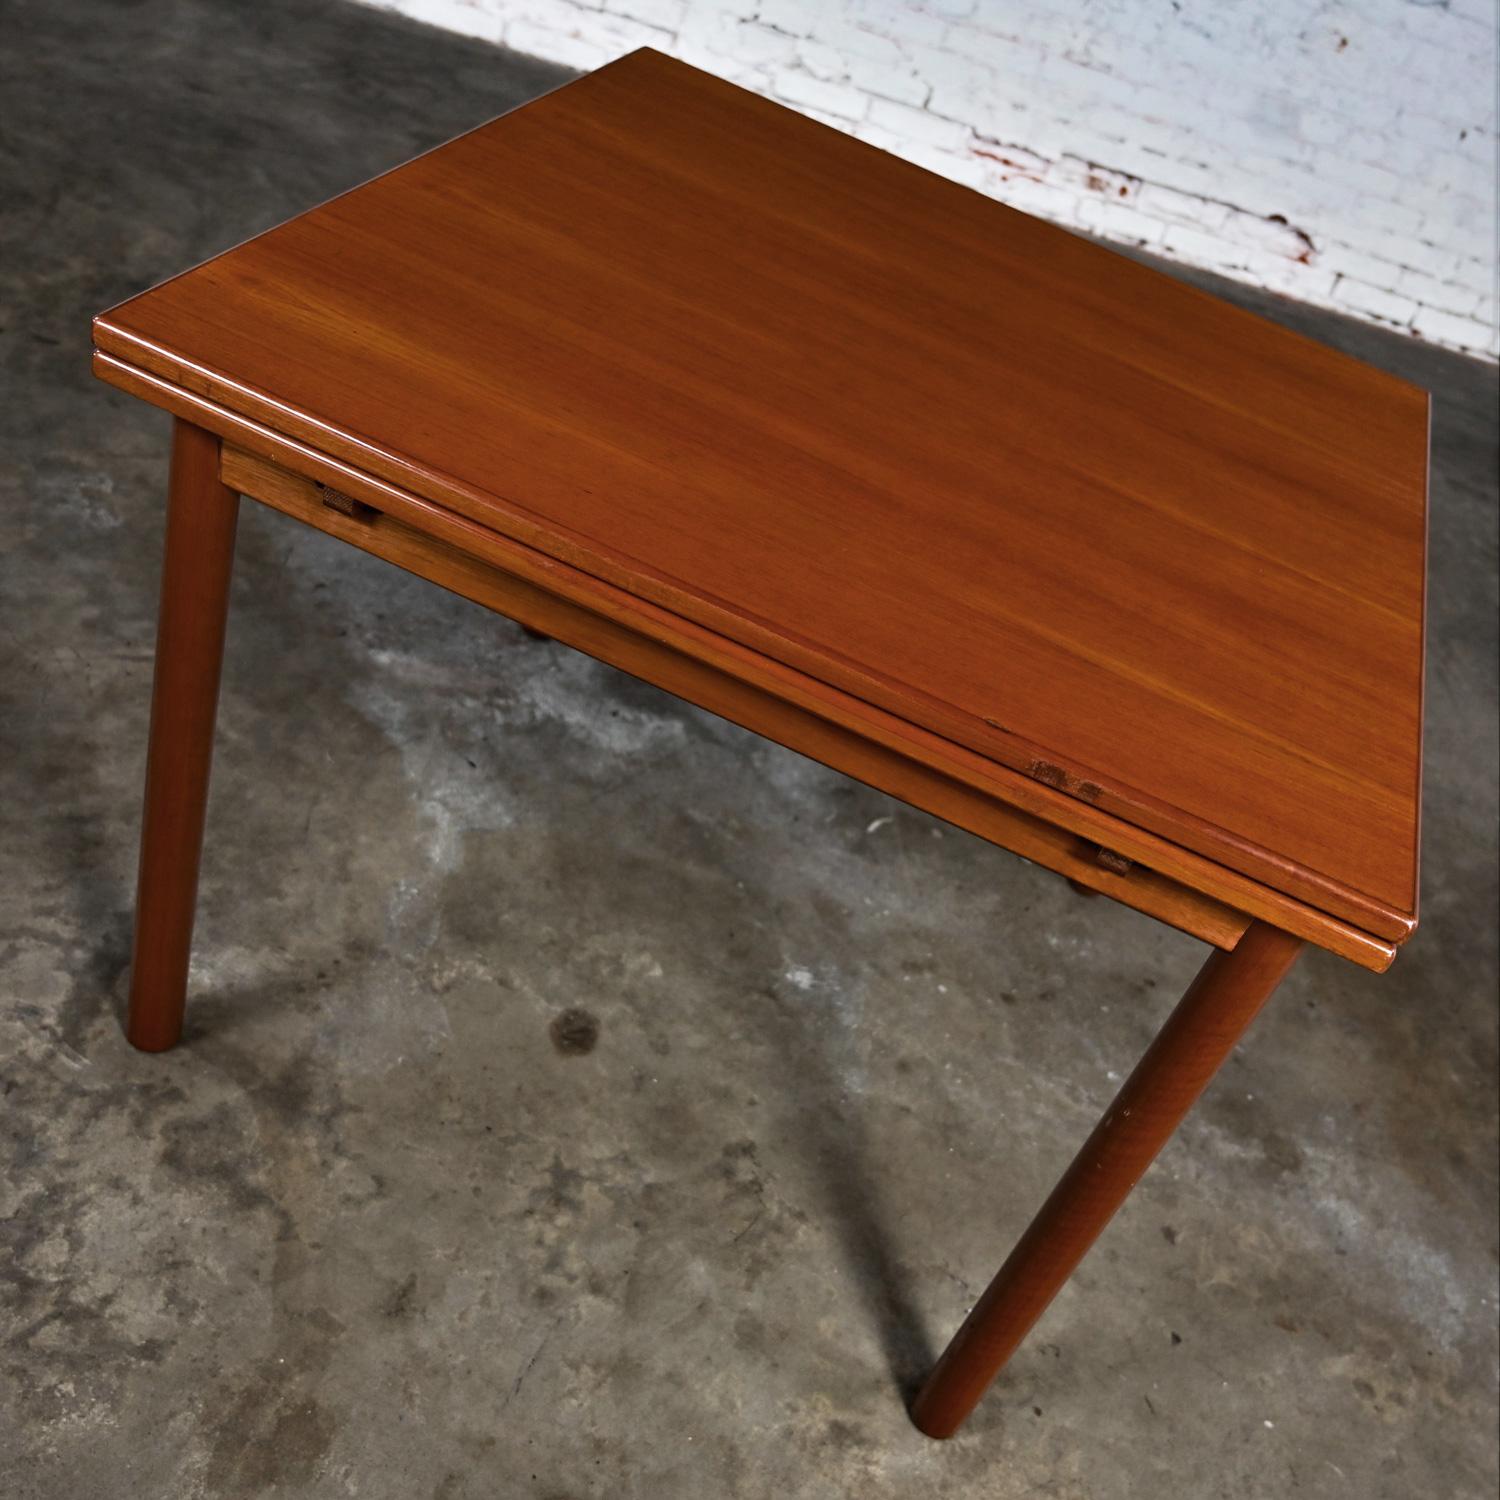 20th Century Scandinavian Modern Style Teak Square Extension Dining Table Made in Singapore For Sale